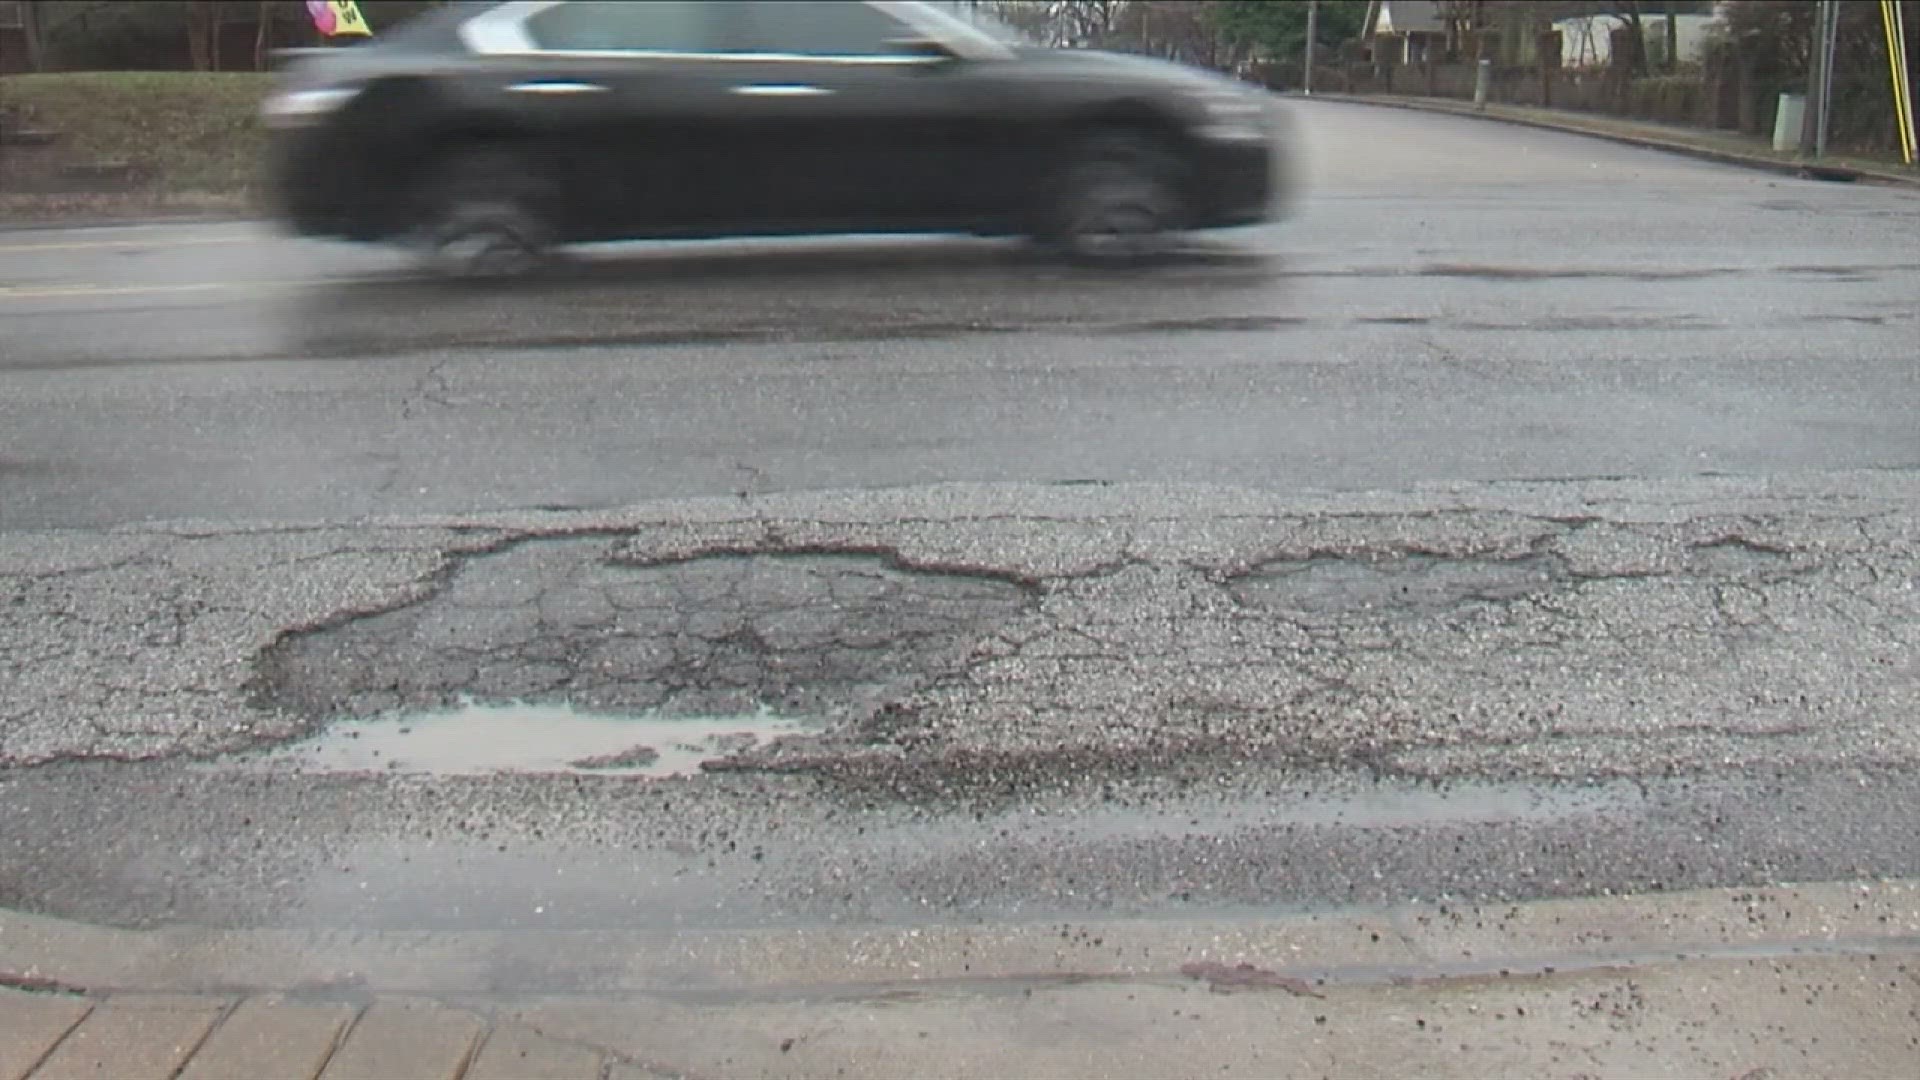 TDOT and the city of Memphis are among the groups ramping up efforts to fix potholes in the coming days.